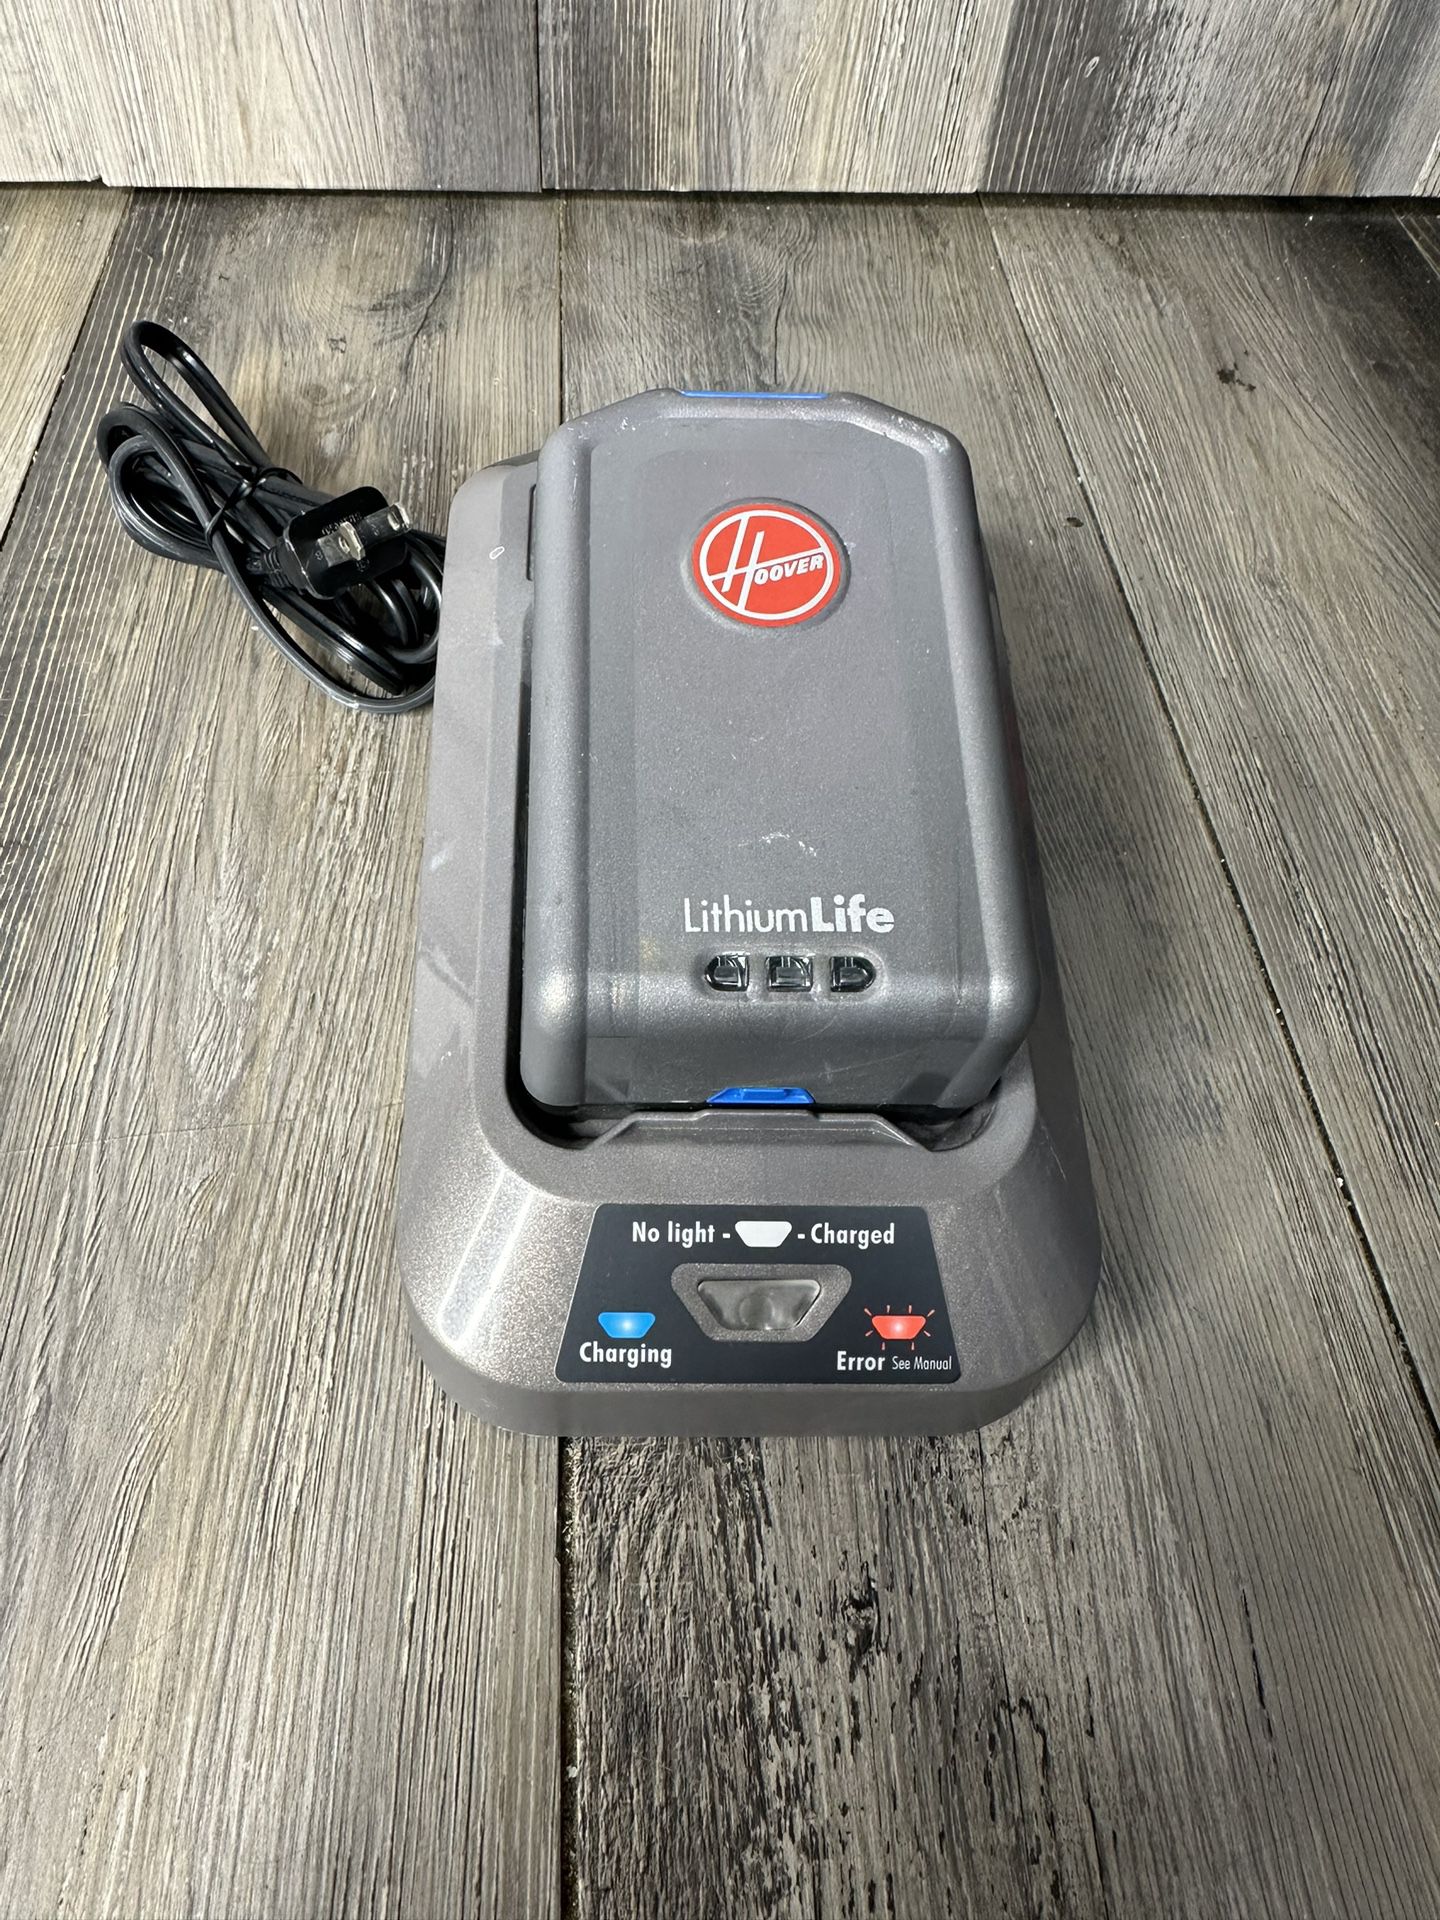 Hoover Charger BH03200 20.0V Lithium Life Battery BH03120 Vacuum